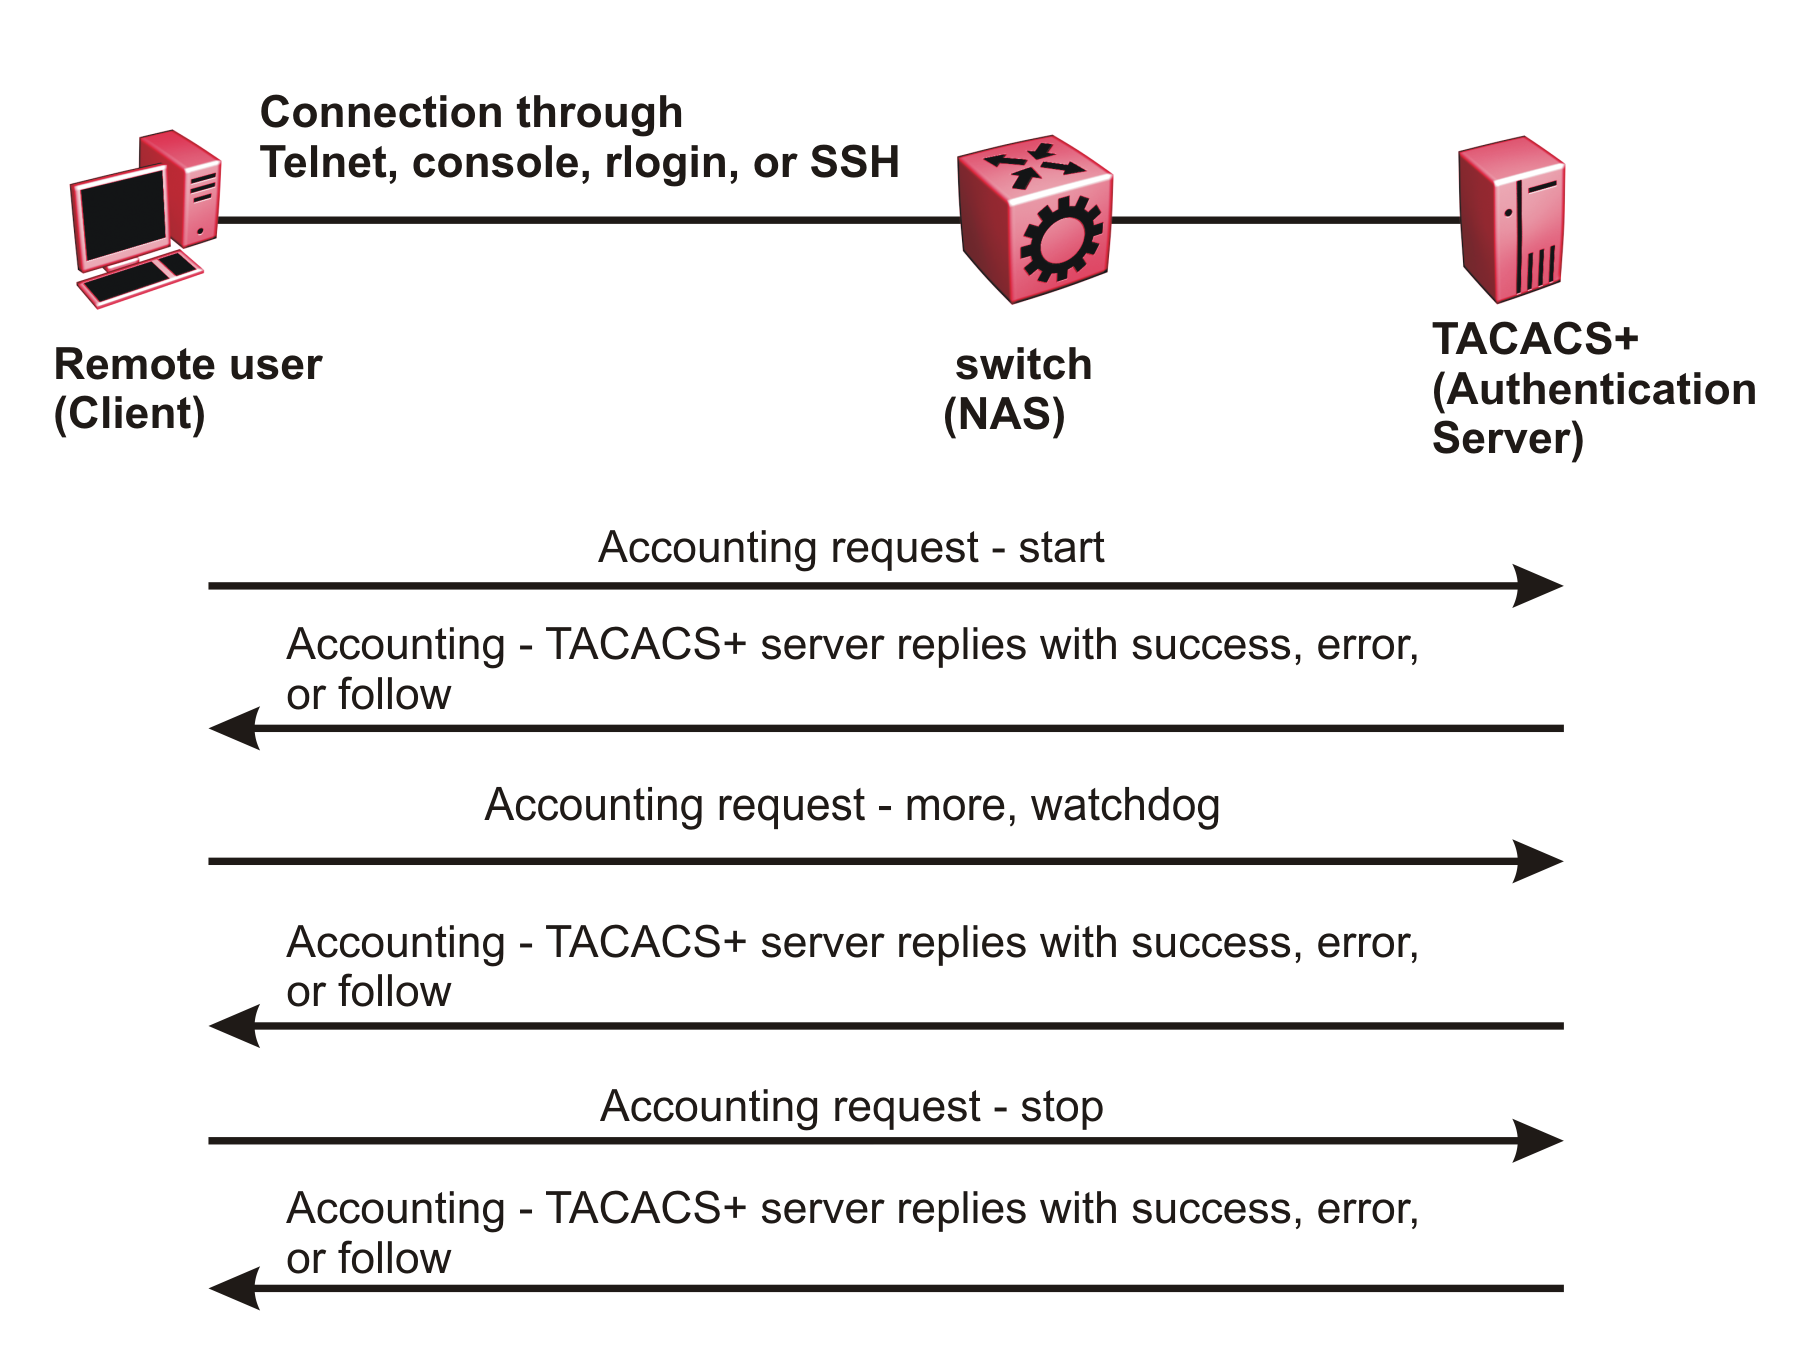 Directional arrows show the back and forth communication that flows between a remote user and the TACACS+ authenticatoin server through a NAS.